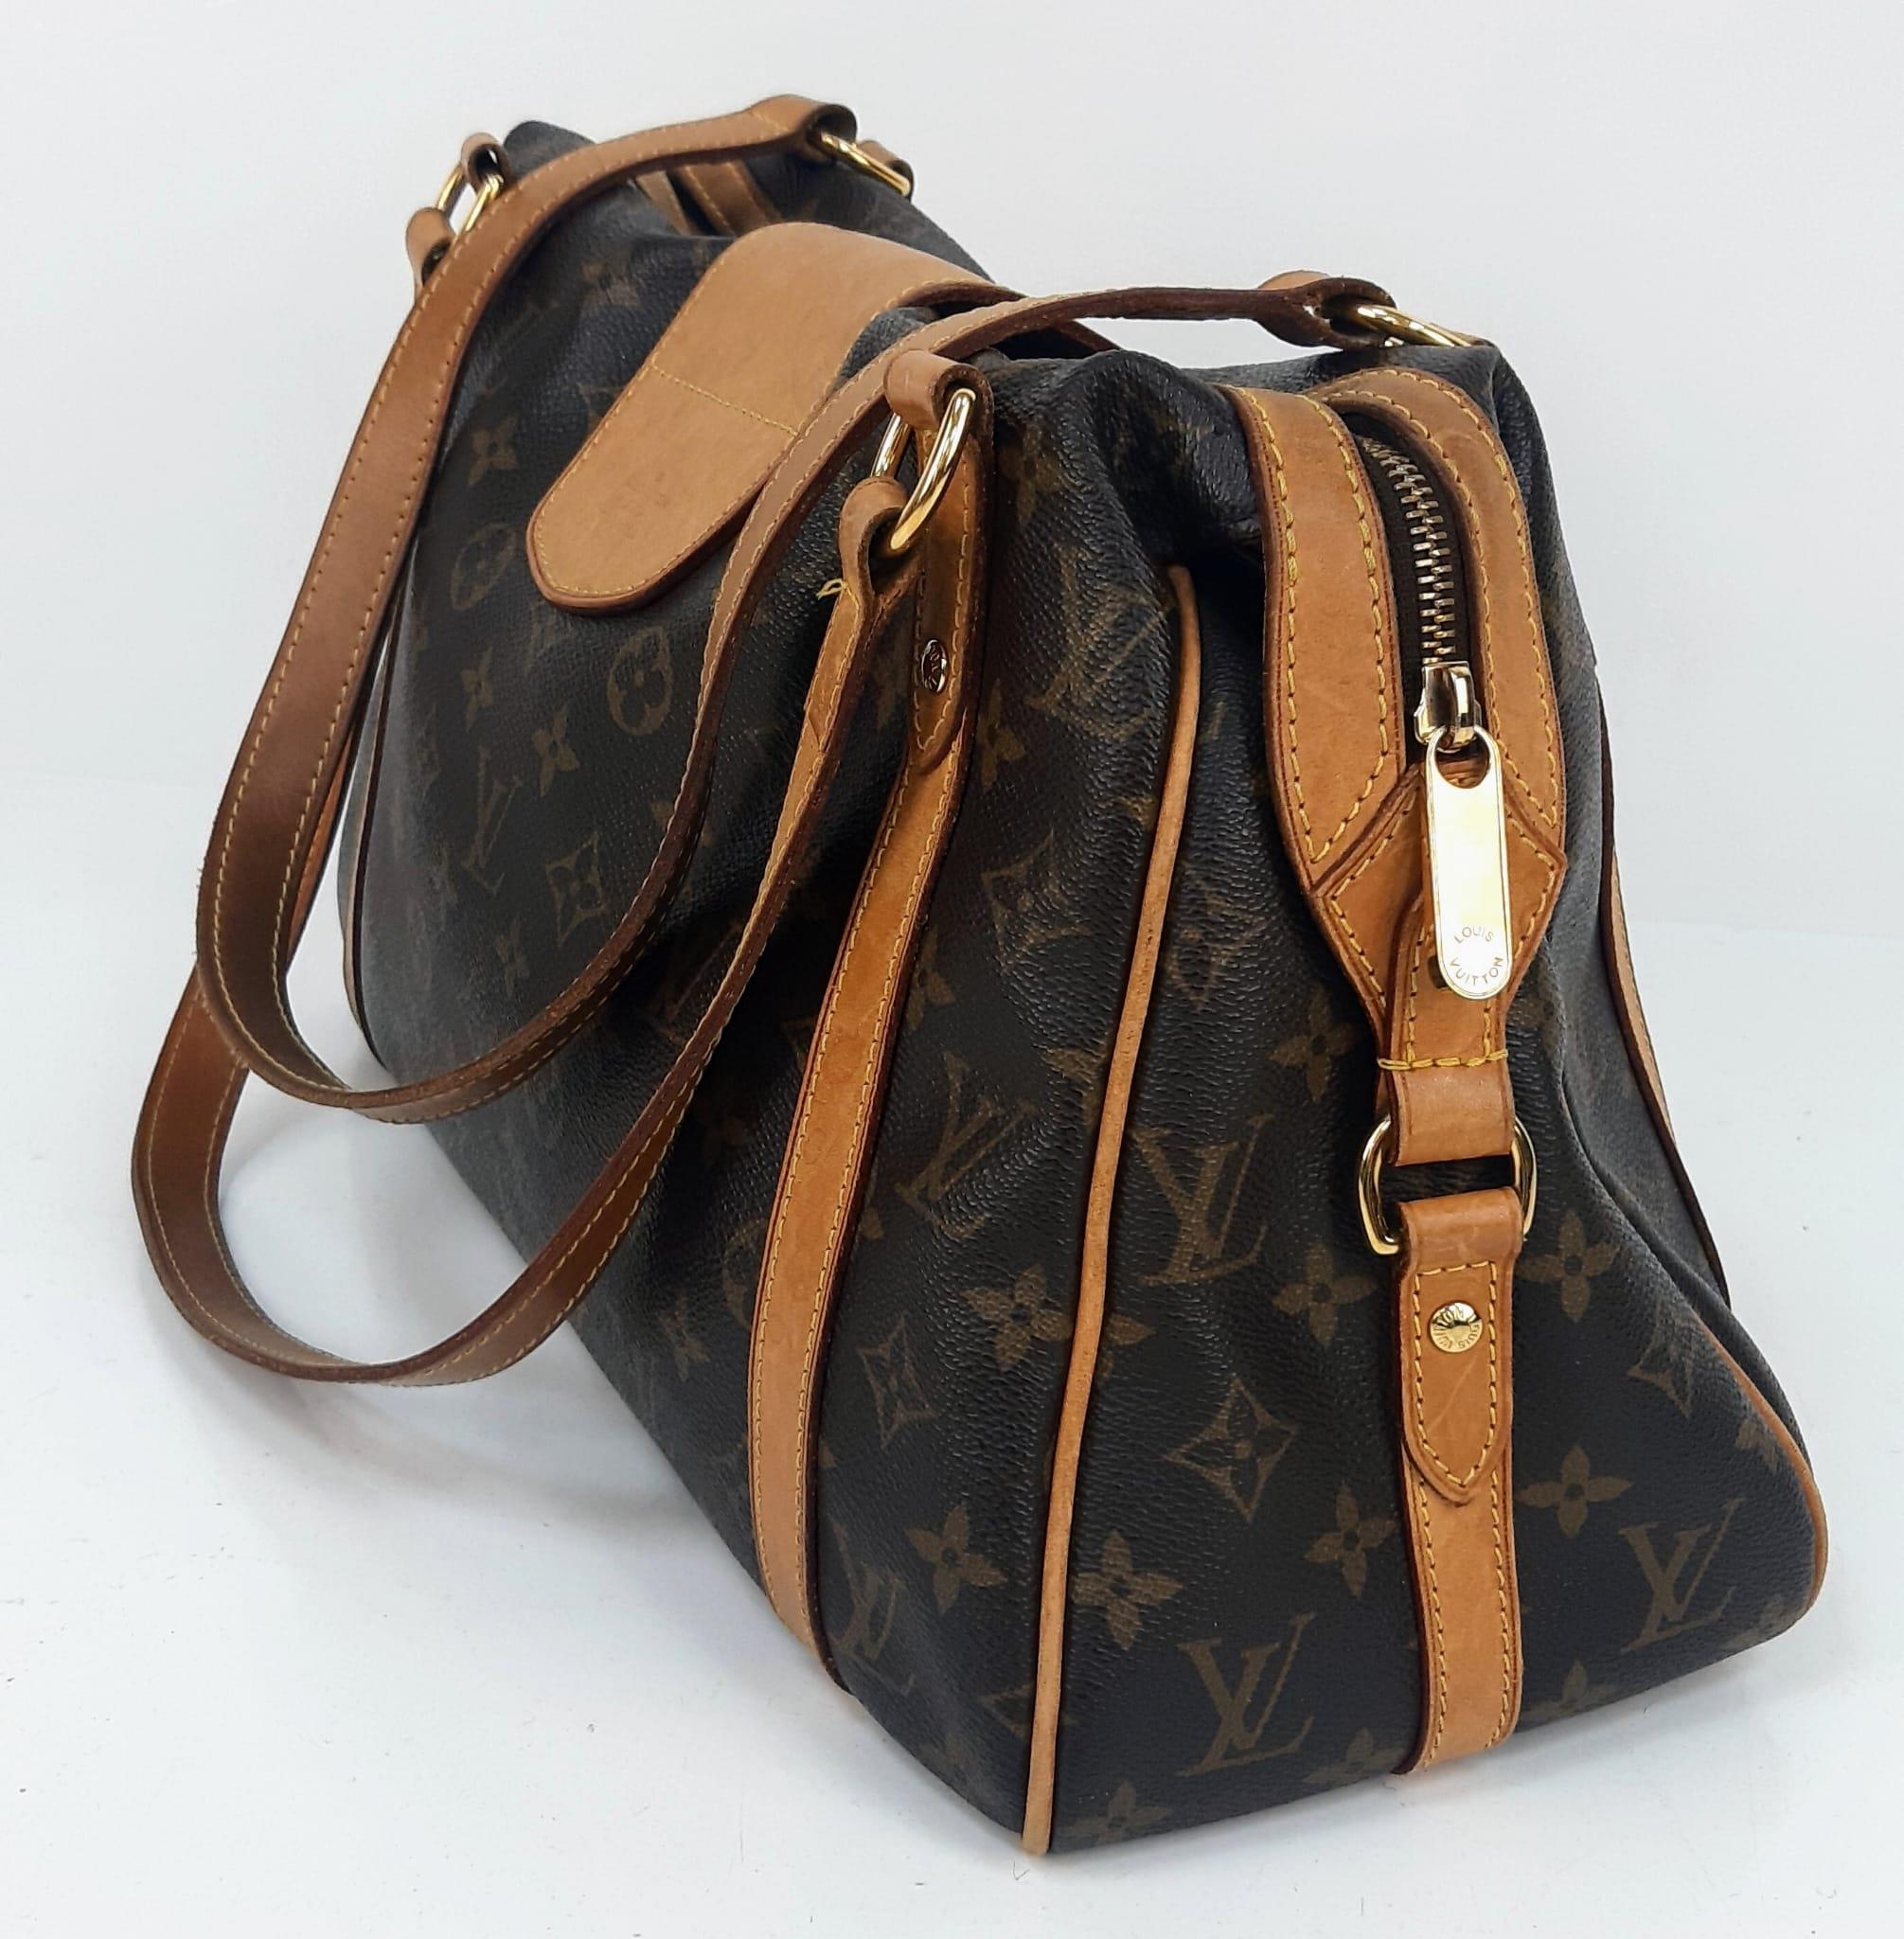 A Louis Vuitton Monogram Canvas Stresa PM Bag. Leather trim with gold-tone hardware. Nylon lined - Image 3 of 7